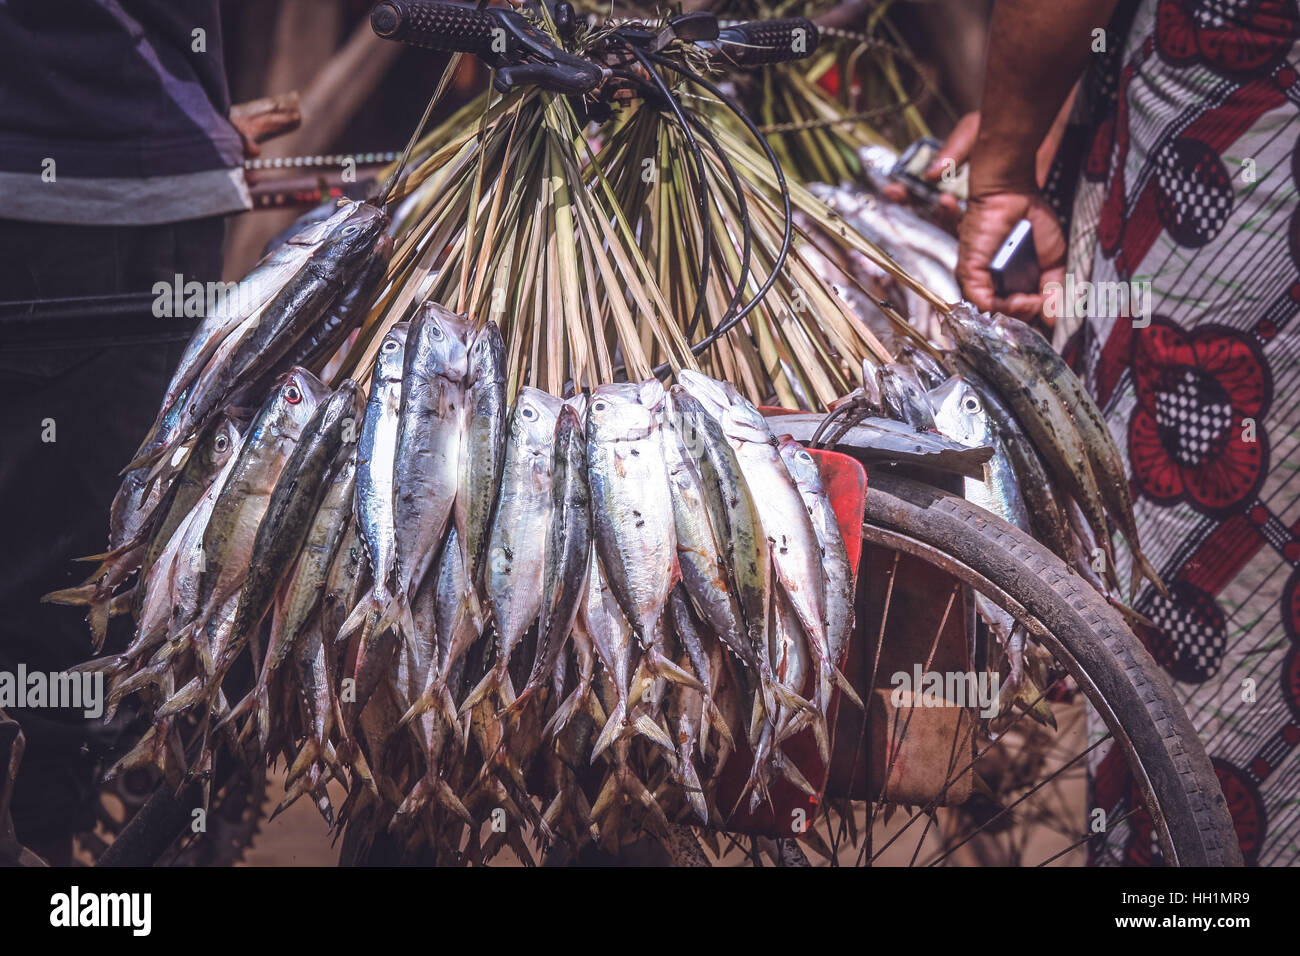 Bunch of fish for sale from a bicycle stand, market, Madagascar Stock Photo